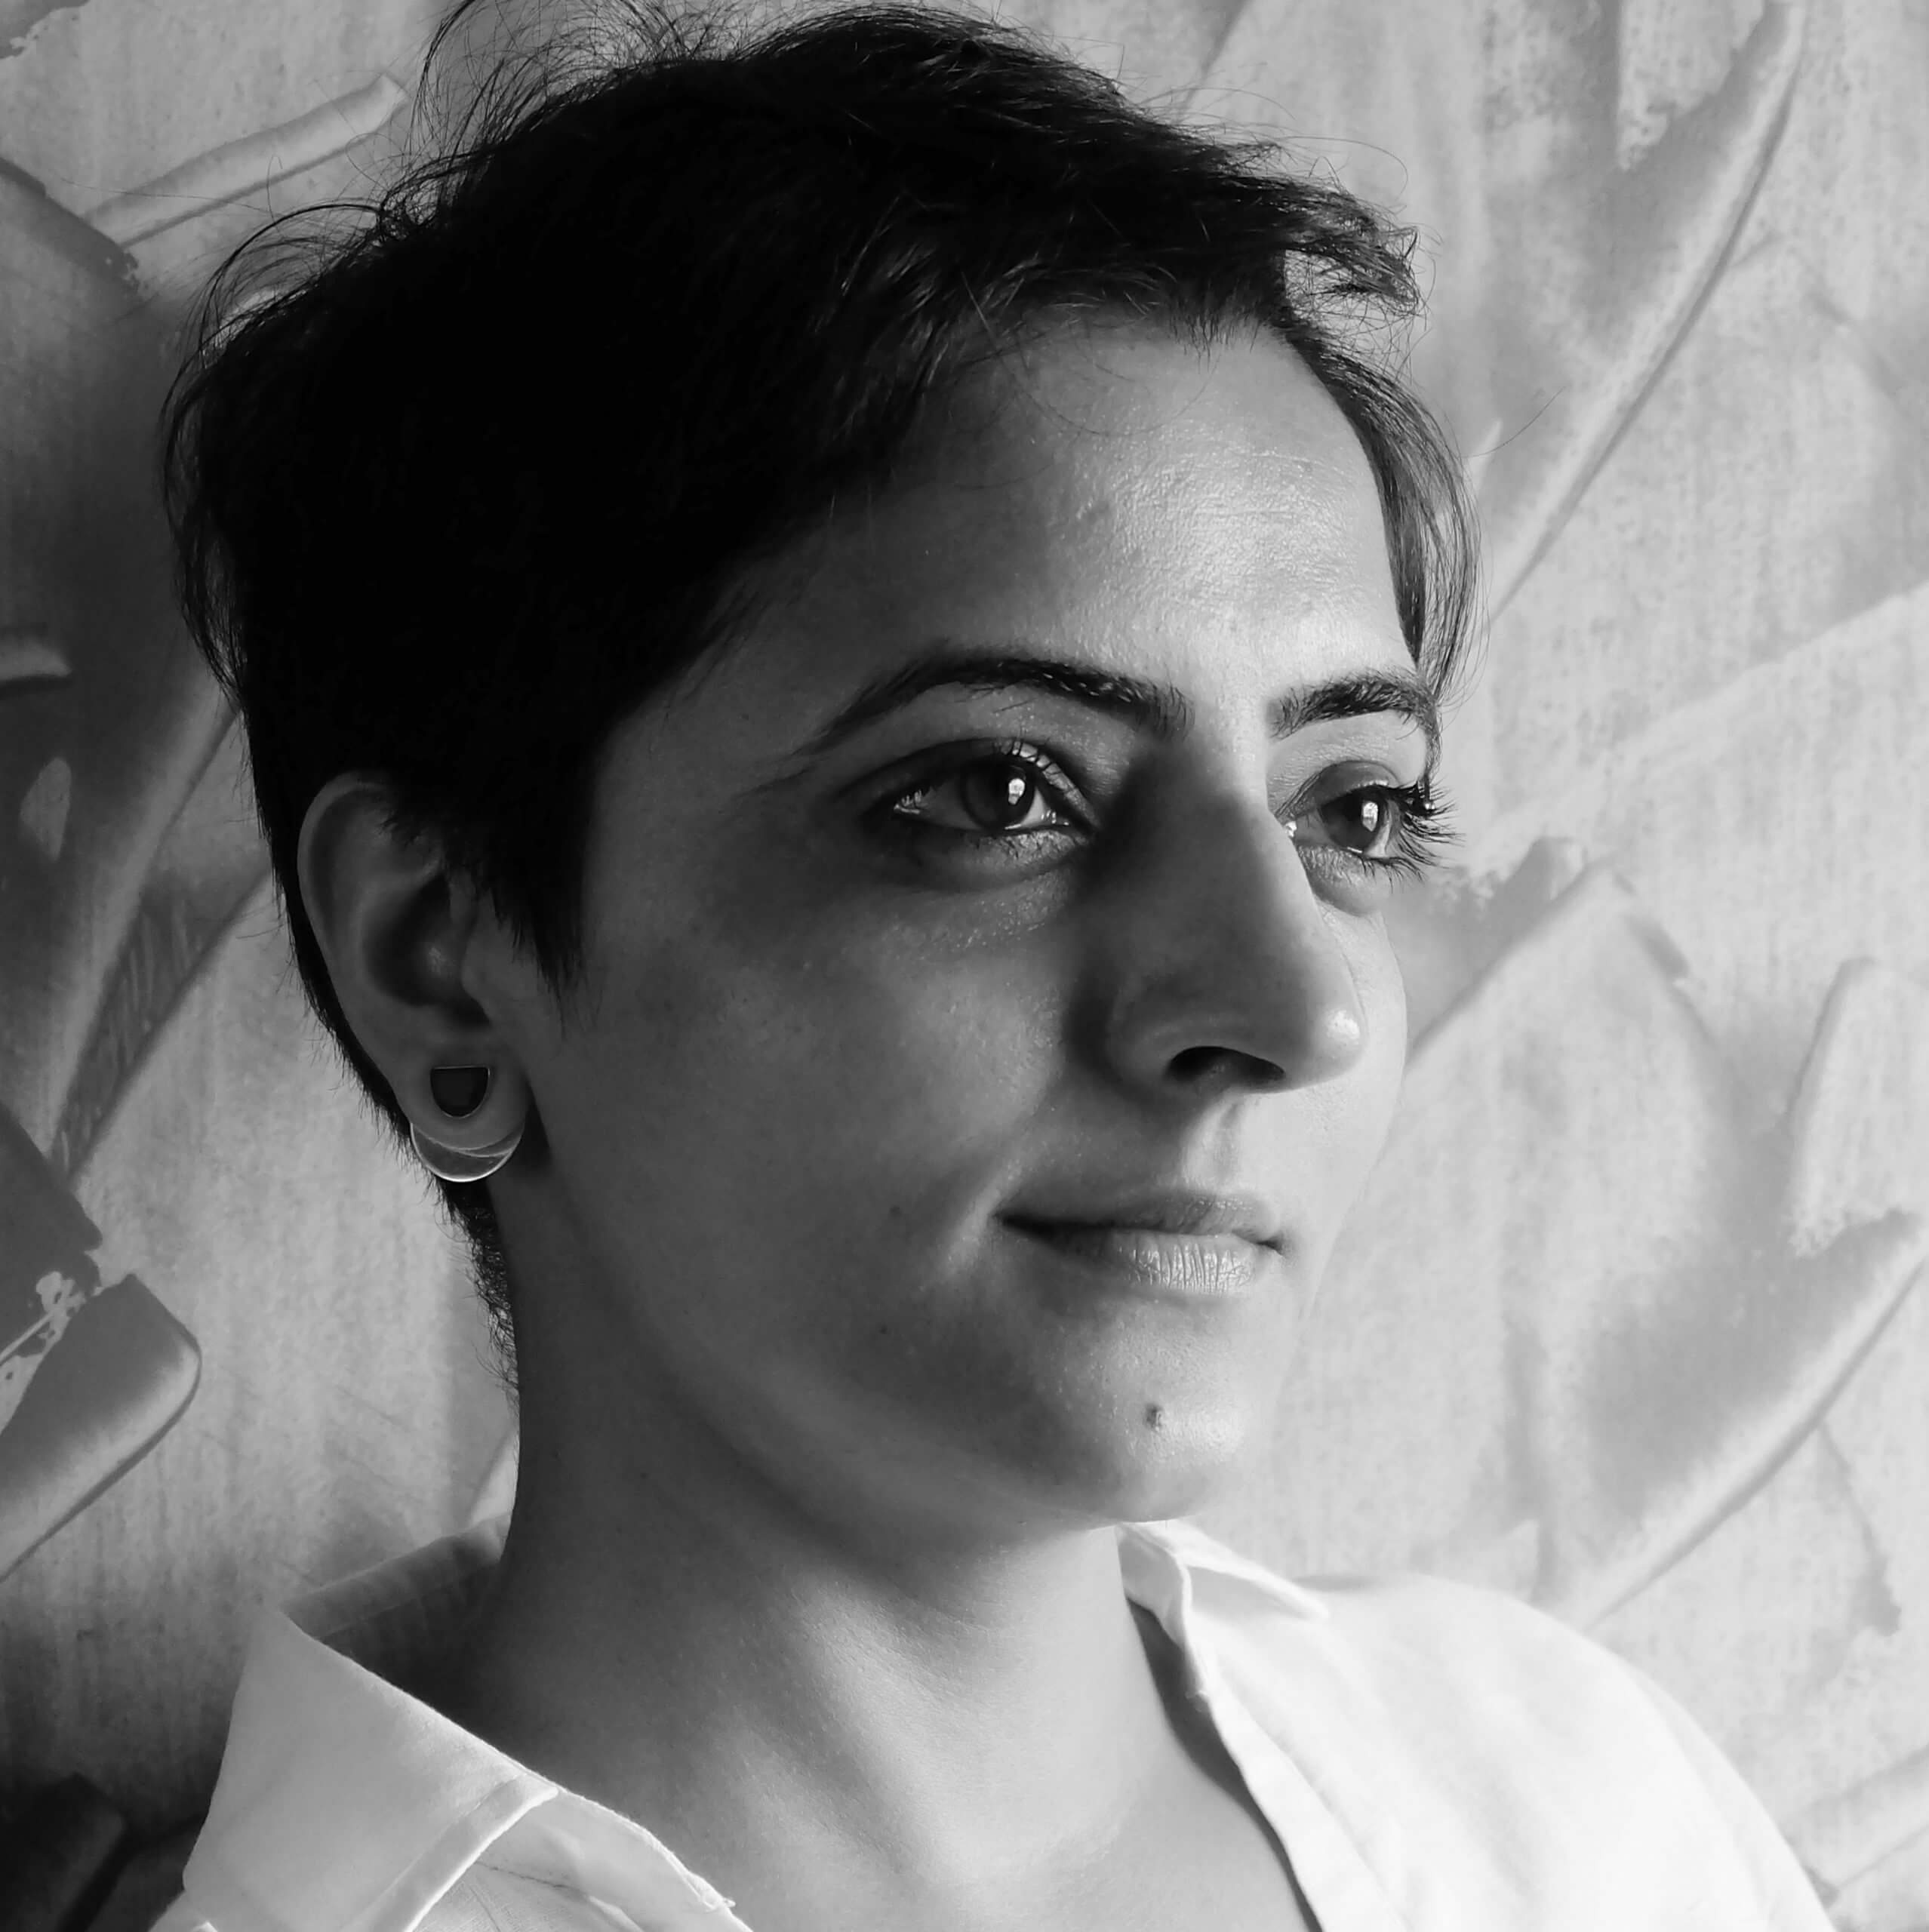 Sarvnik Kaur is leaning against a paper wall and looks away from the camera. She has short hair, and wears a shirt. Portrait in black and white.